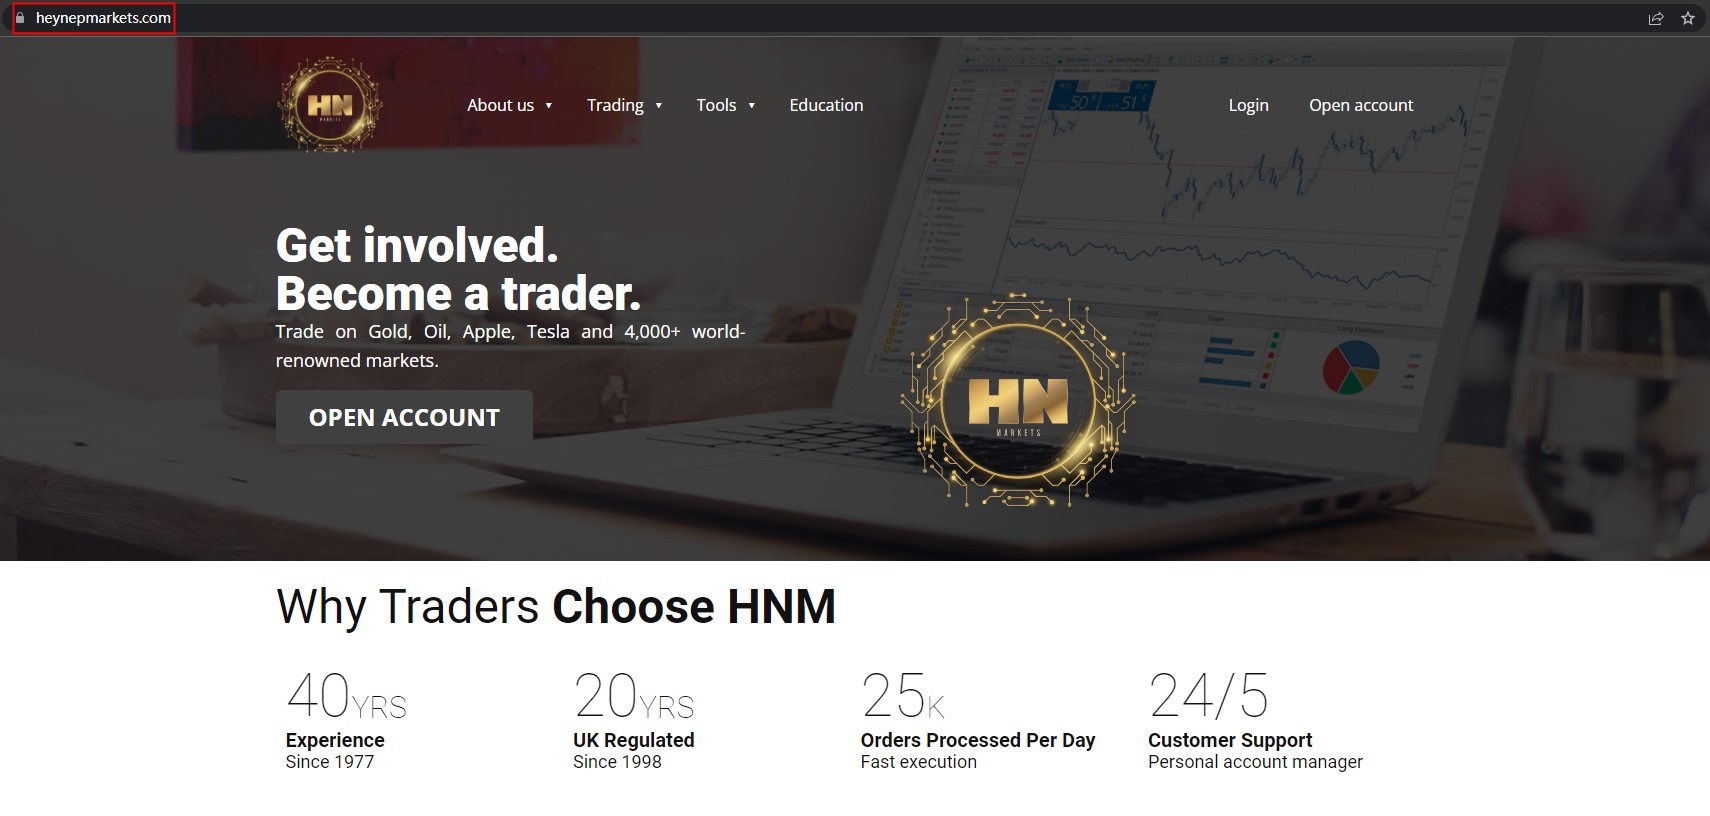 Scam Alerts: UK FCA Warns Two Clones - HNM and TradeHUB